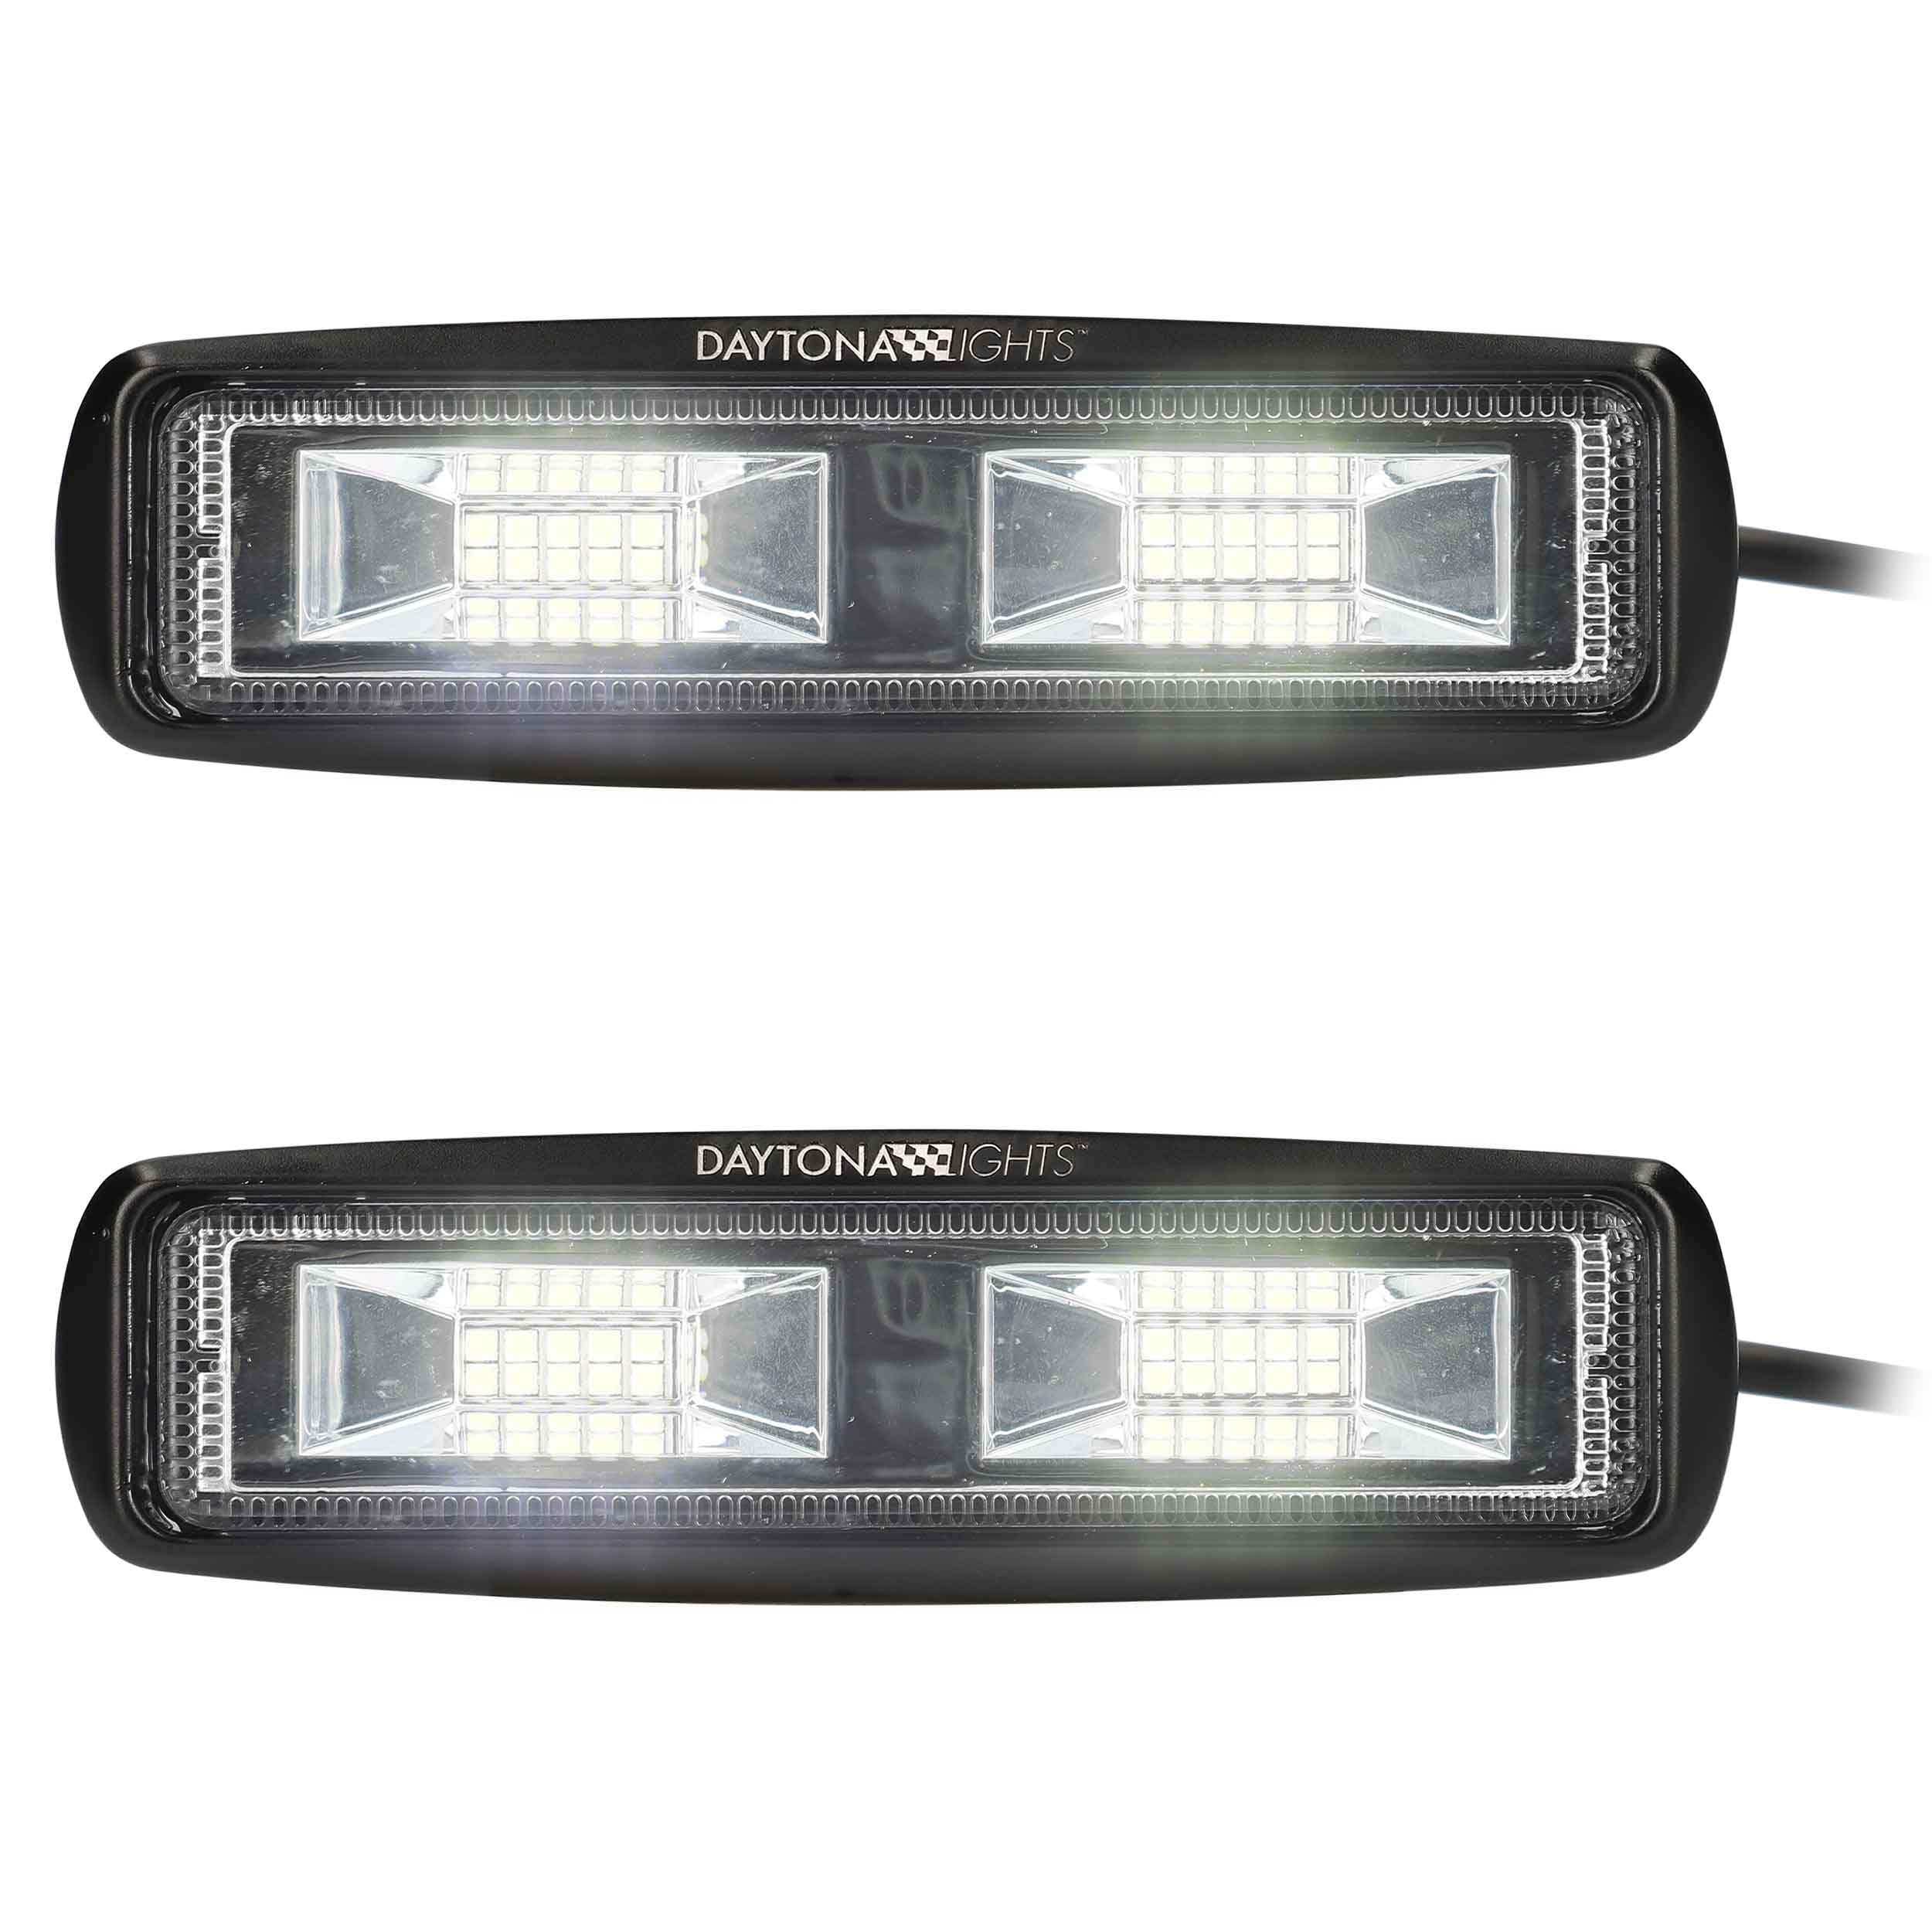 TRADITIONAL DRIVING LIGHTS  20 LED